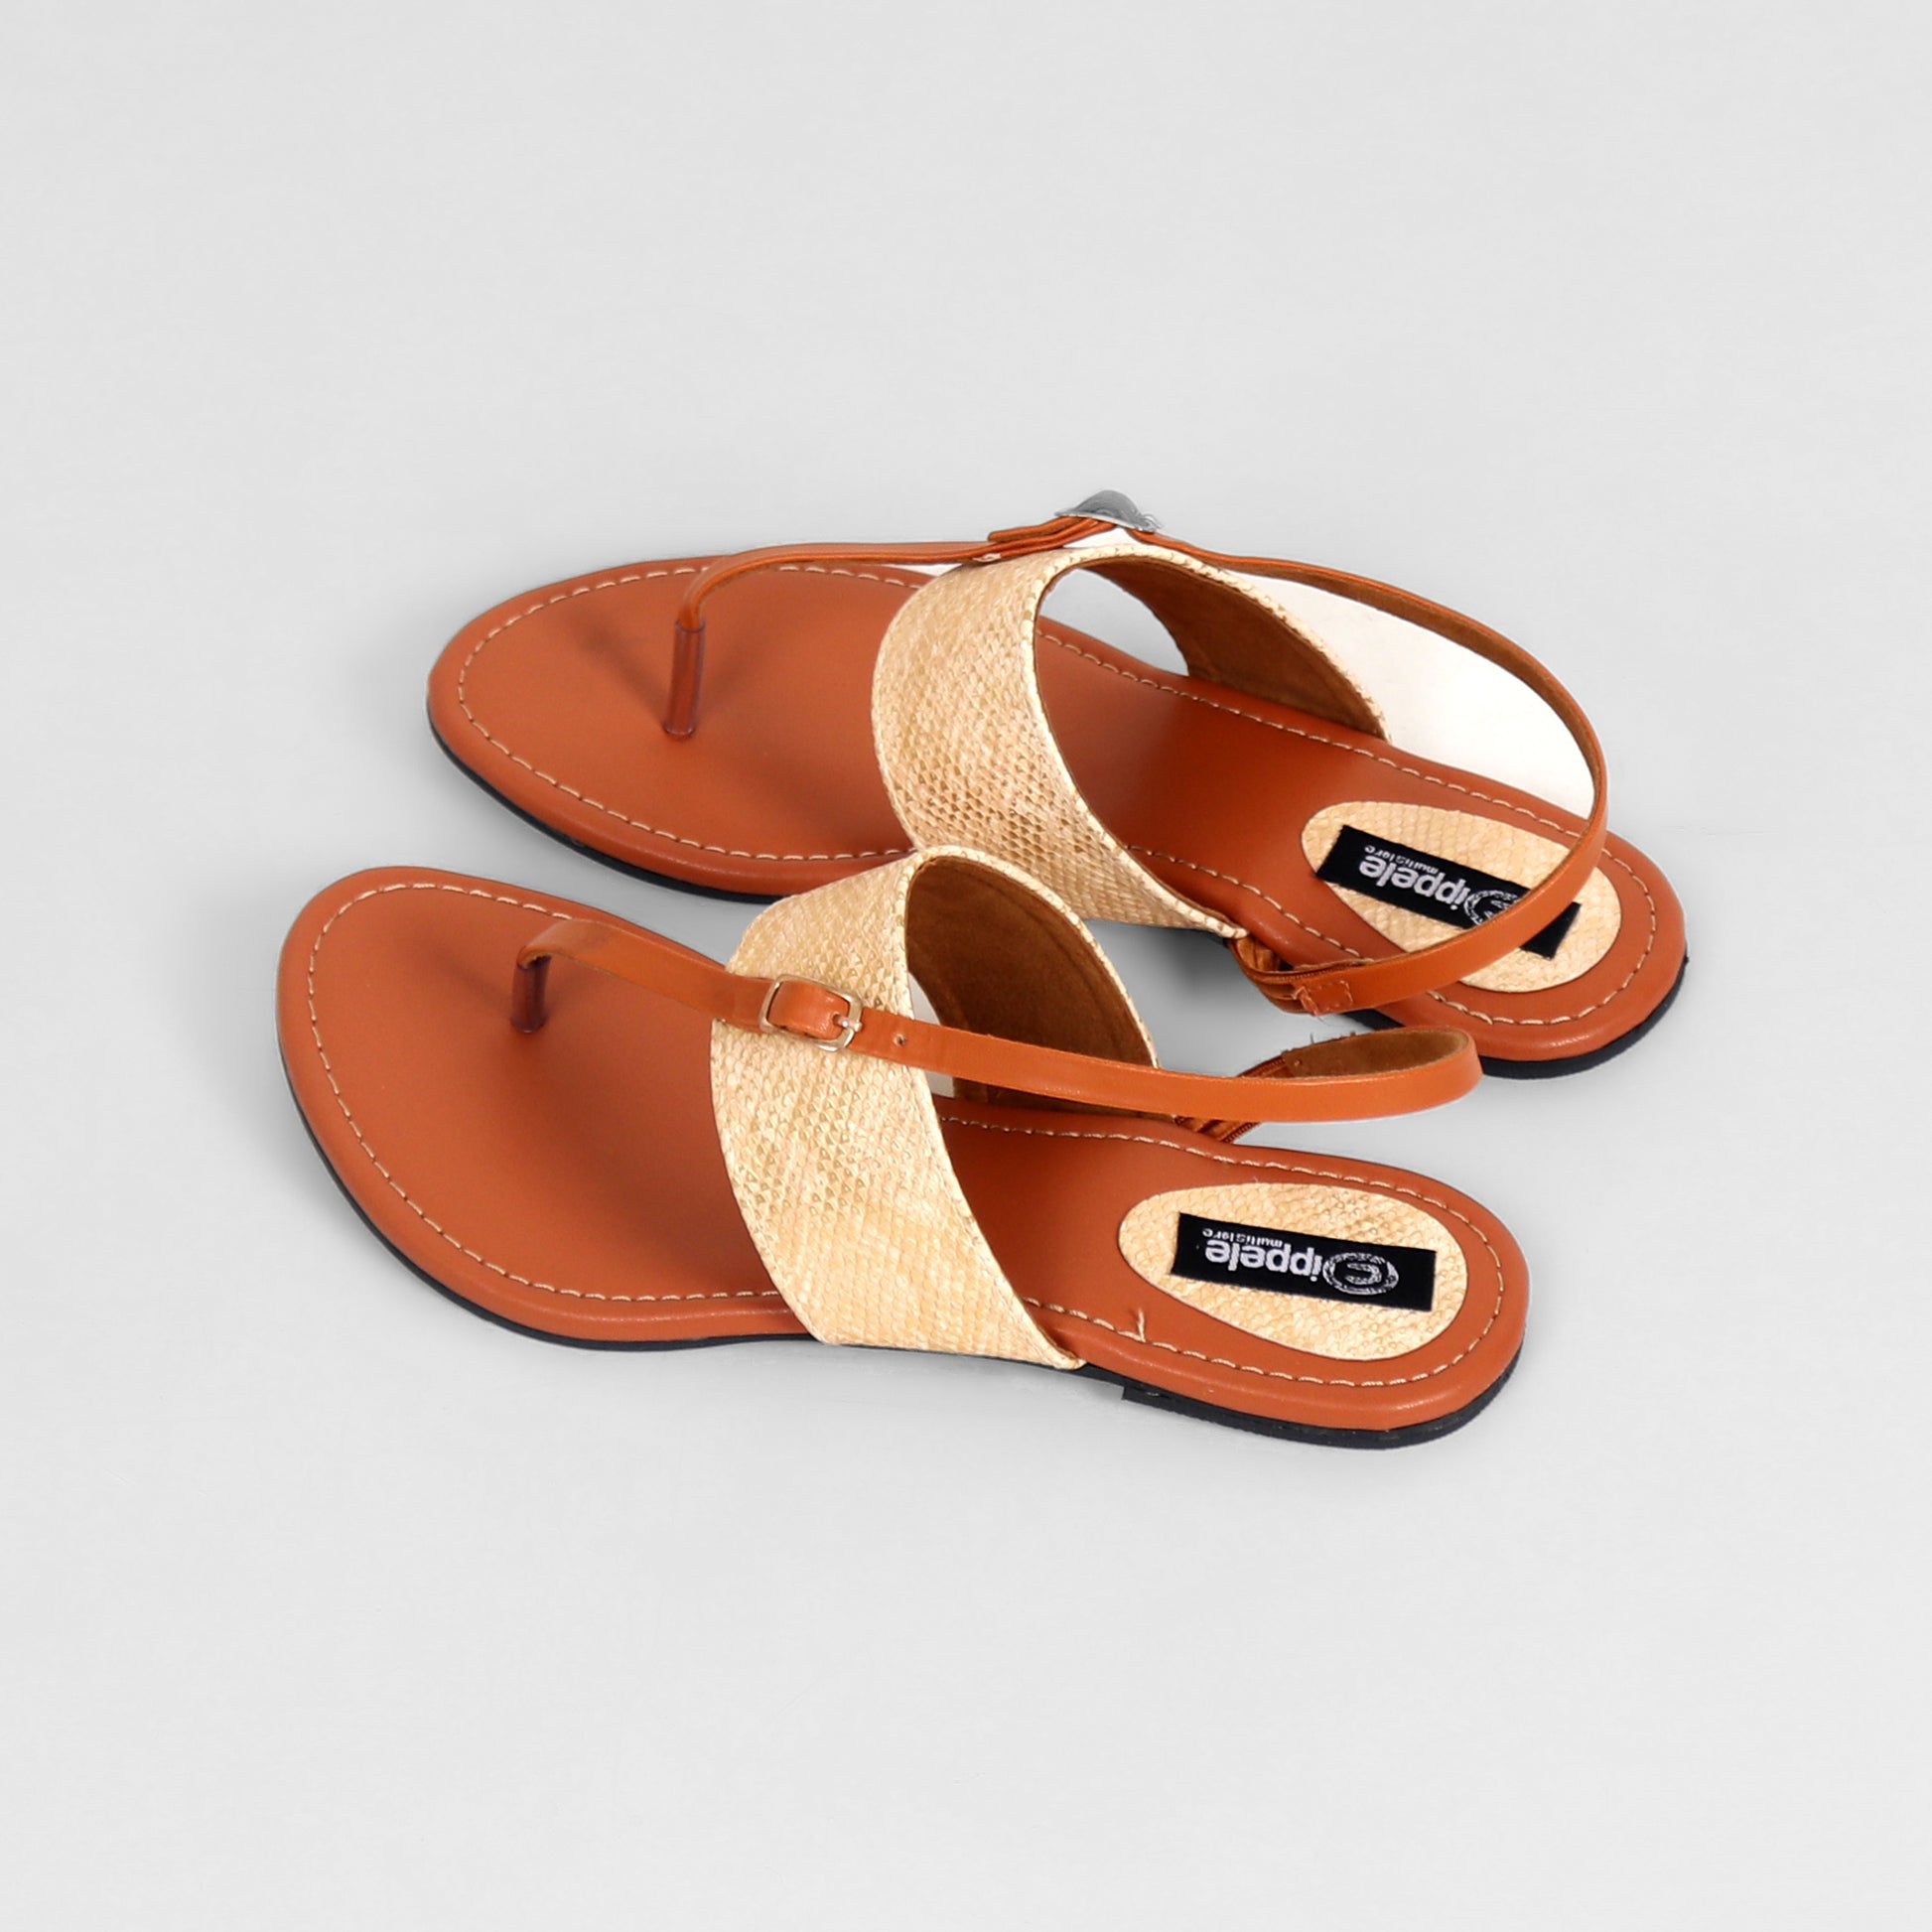 Foot Wear,Something Fashionable Sandals - Cippele Multi Store